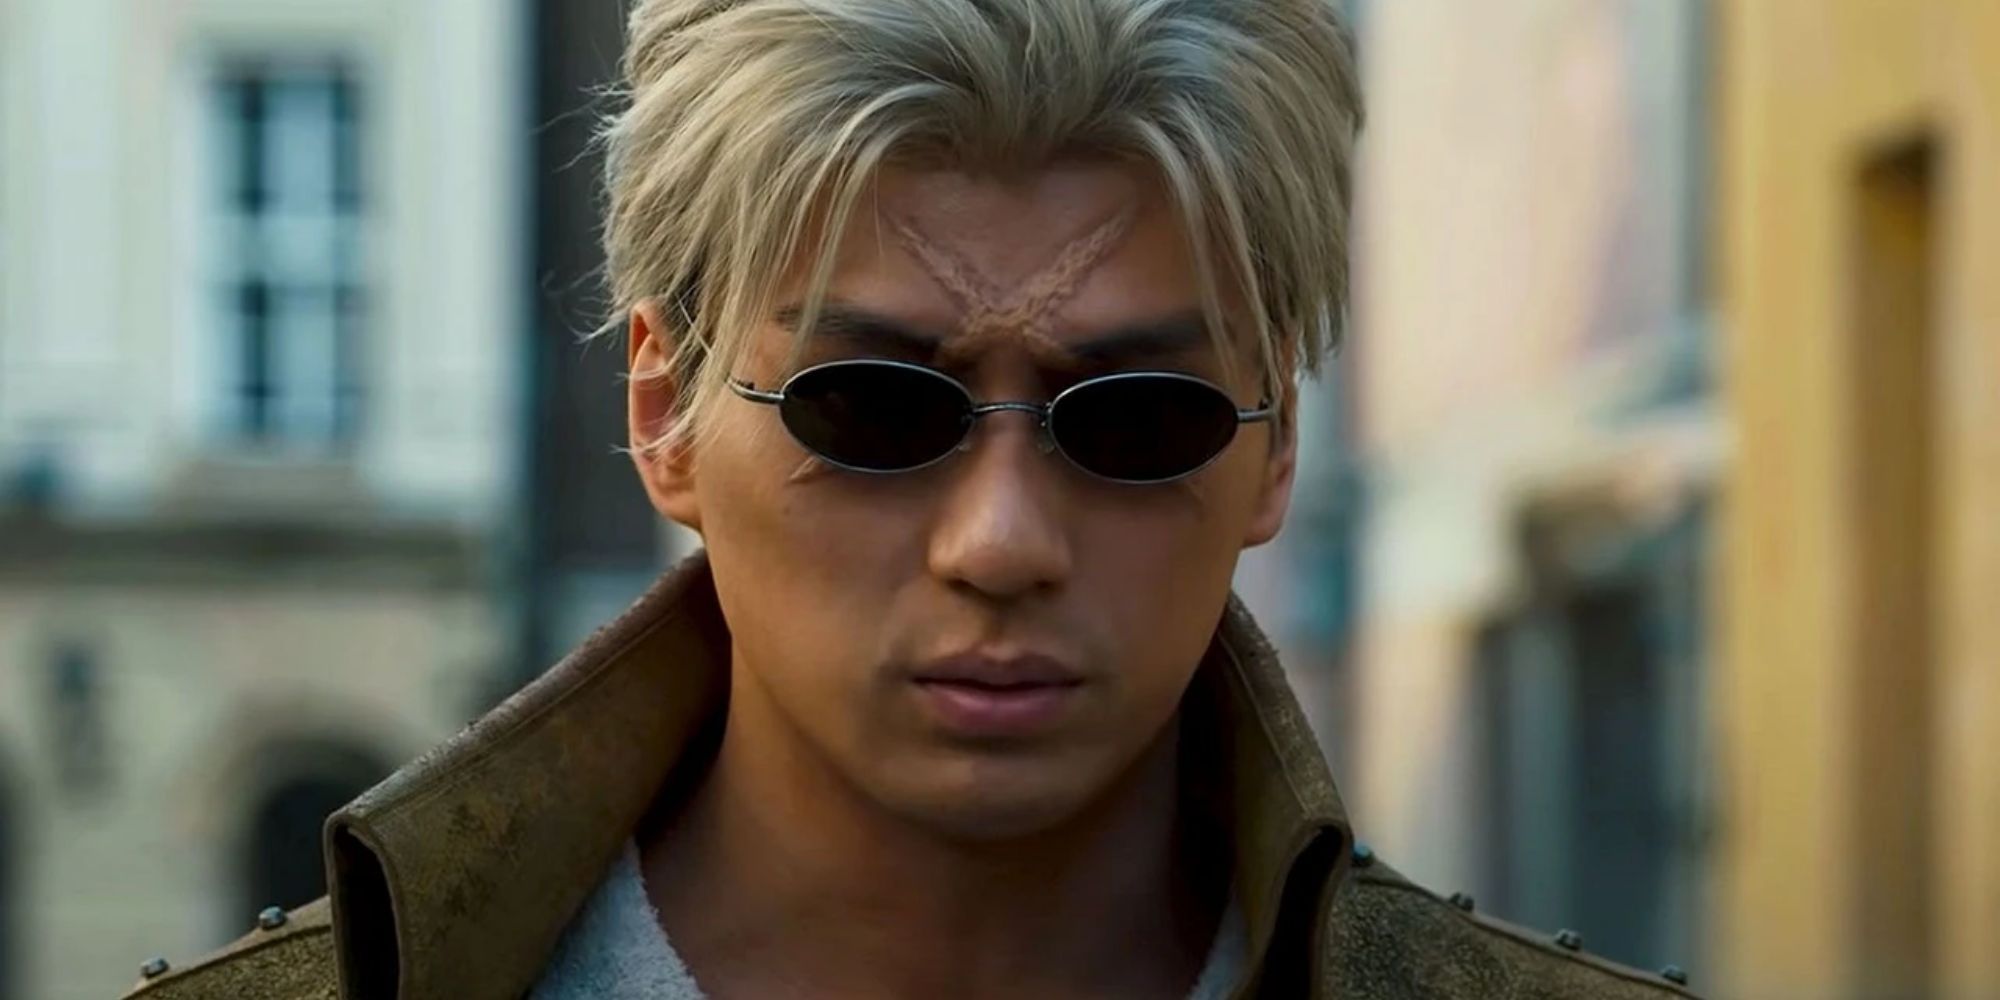 The man with the scar on his head wearing sunglasses in the live-action Fullmetal Alchemist: Revenge Of Scar